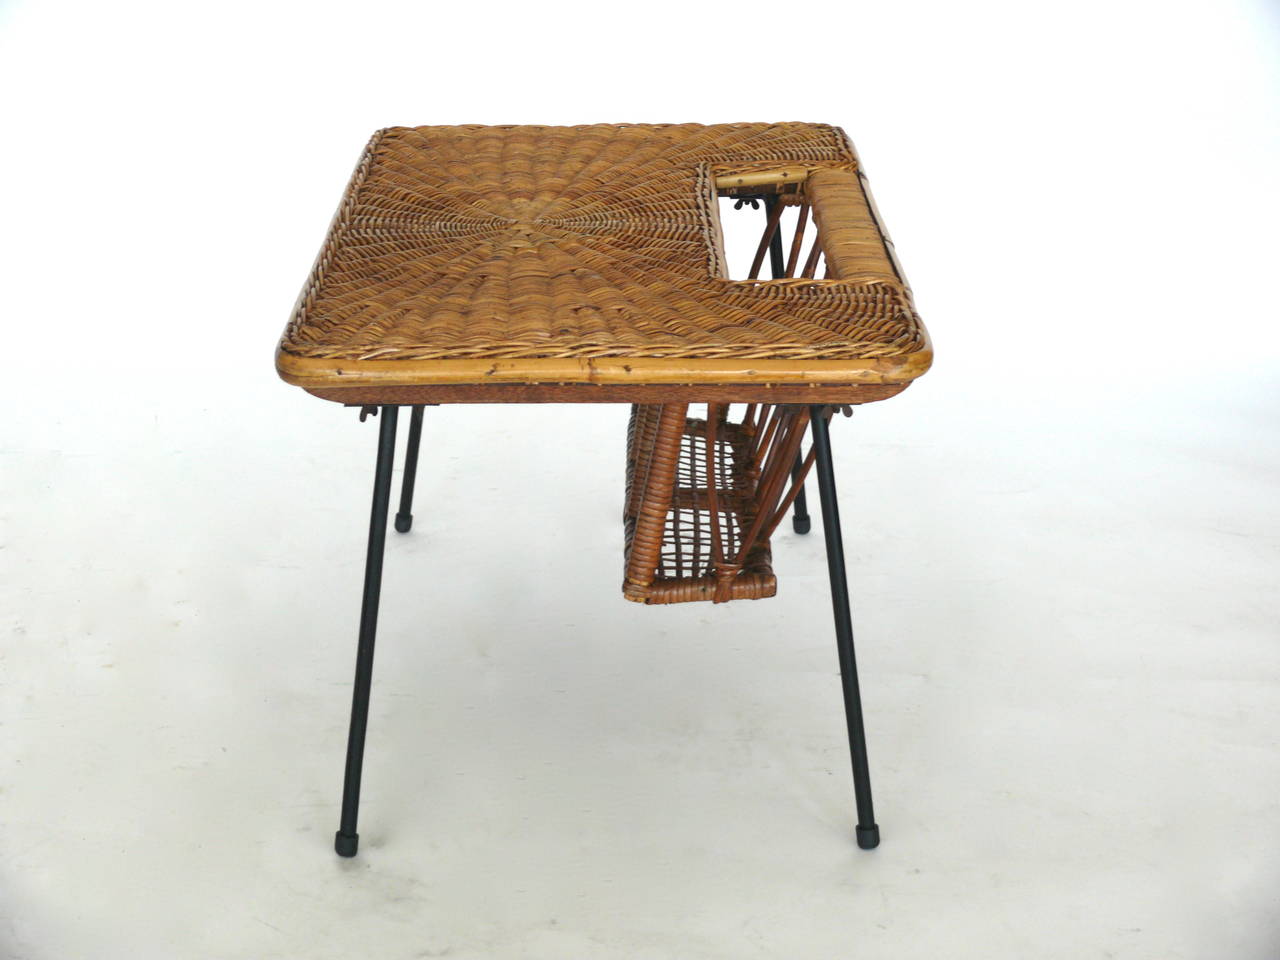 Unique French occasional table with magazine pocket.  Wicker top has a beautiful pattern and sits on a black iron base with rattan trim and pocket for magazines or books.